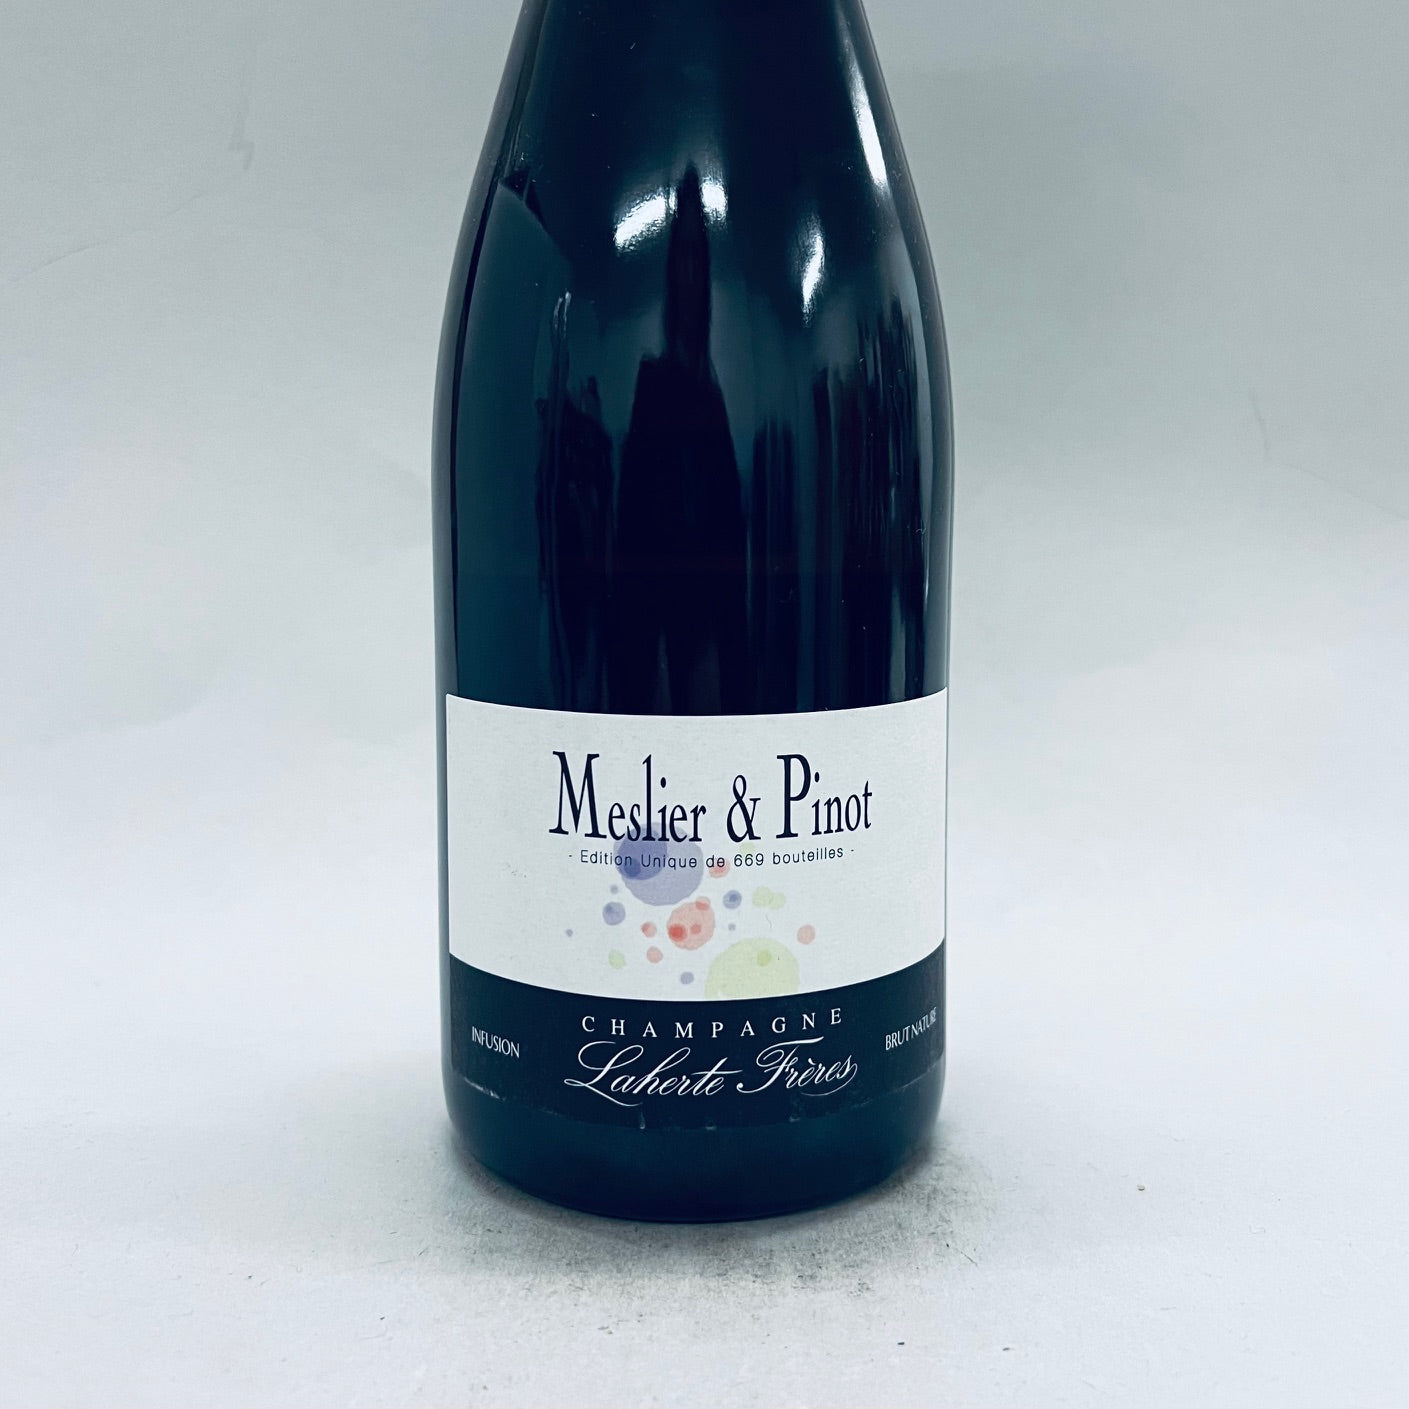 2019 Laherte Freres "Infusion" Meslier & Pinot Champagne